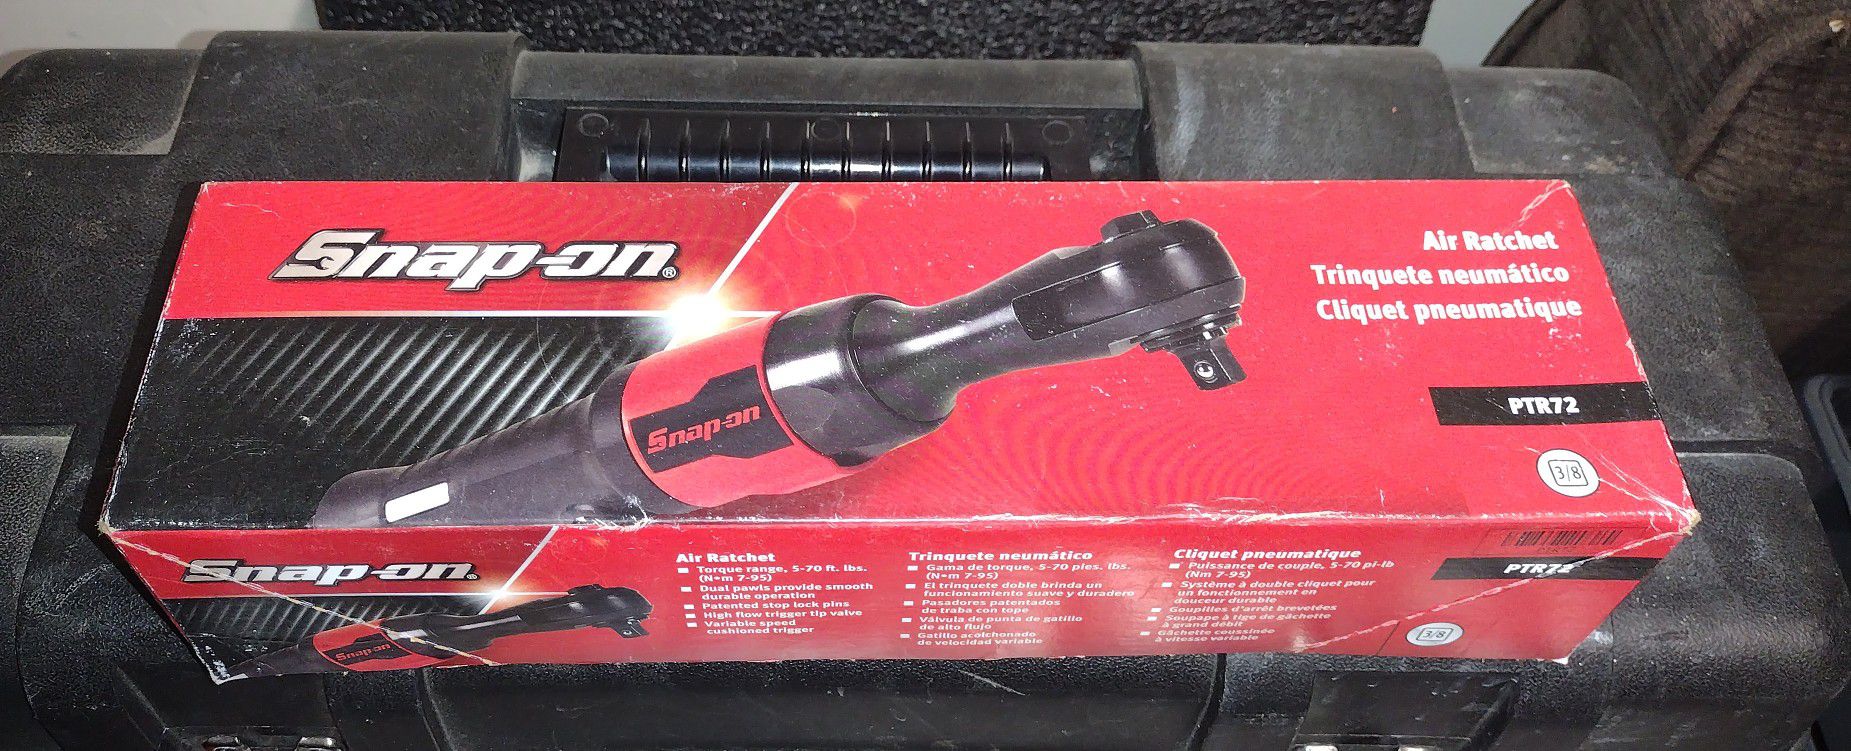 NEW Snap-on PTR72 3/8" drive Super Duty Air Ratchet